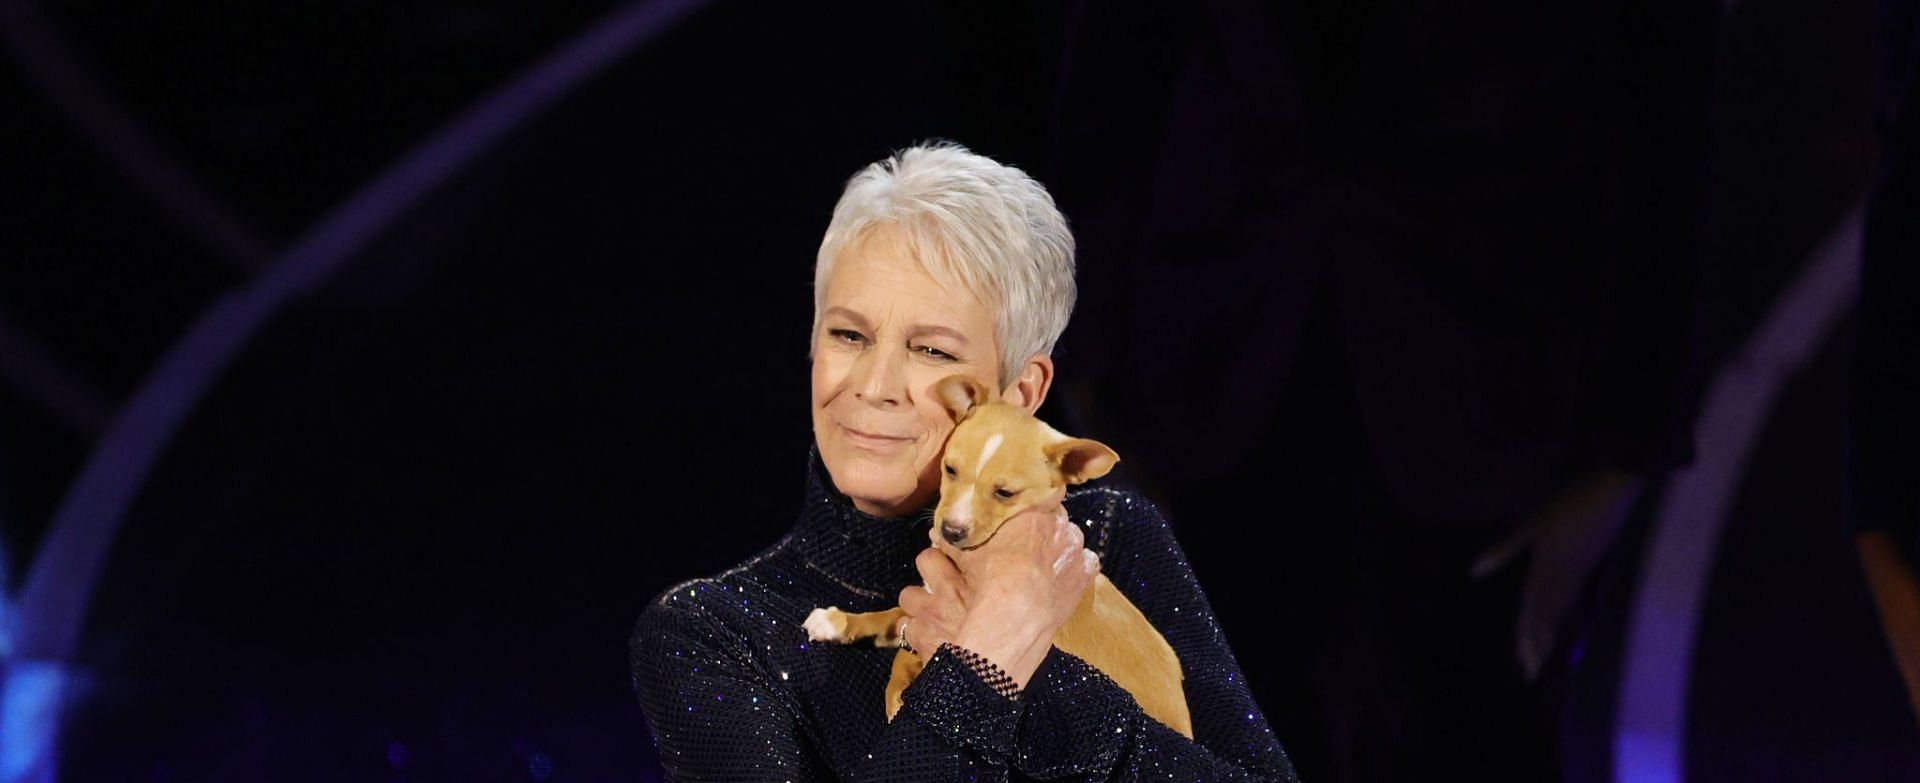 Jamie Lee Curtis&#039; comments on nepotism sparked criticism online (Image via Getty Images)